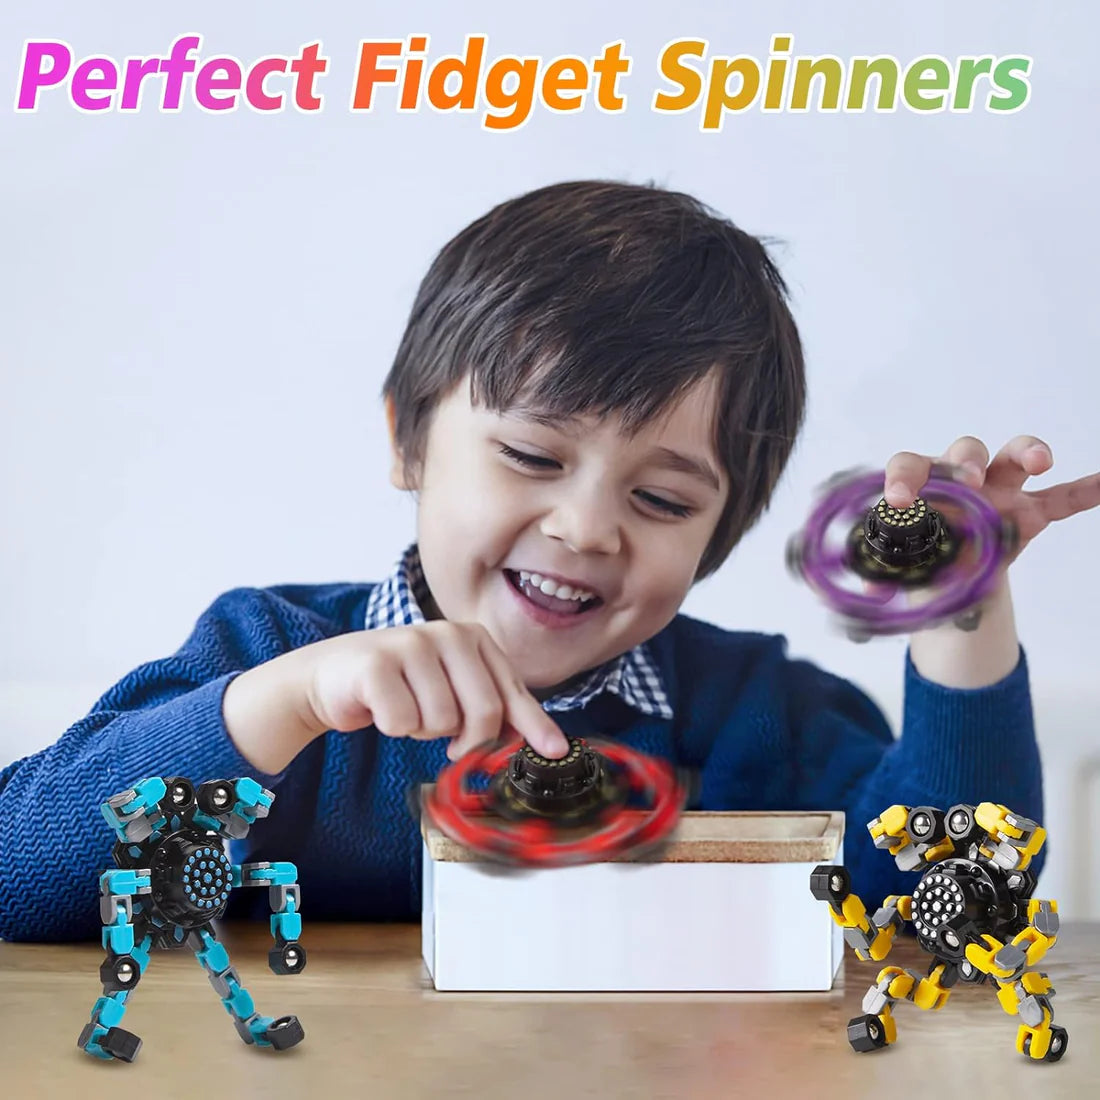 Transformable Fidget Spinners 4 Pcs for Kids and Adults Stress Relief Sensory Toys for Boys and Girls Fingertip Gyros for ADHD Autism for Kids Gifts Easter Basket Stuffers (Fidget Toy 4pc)